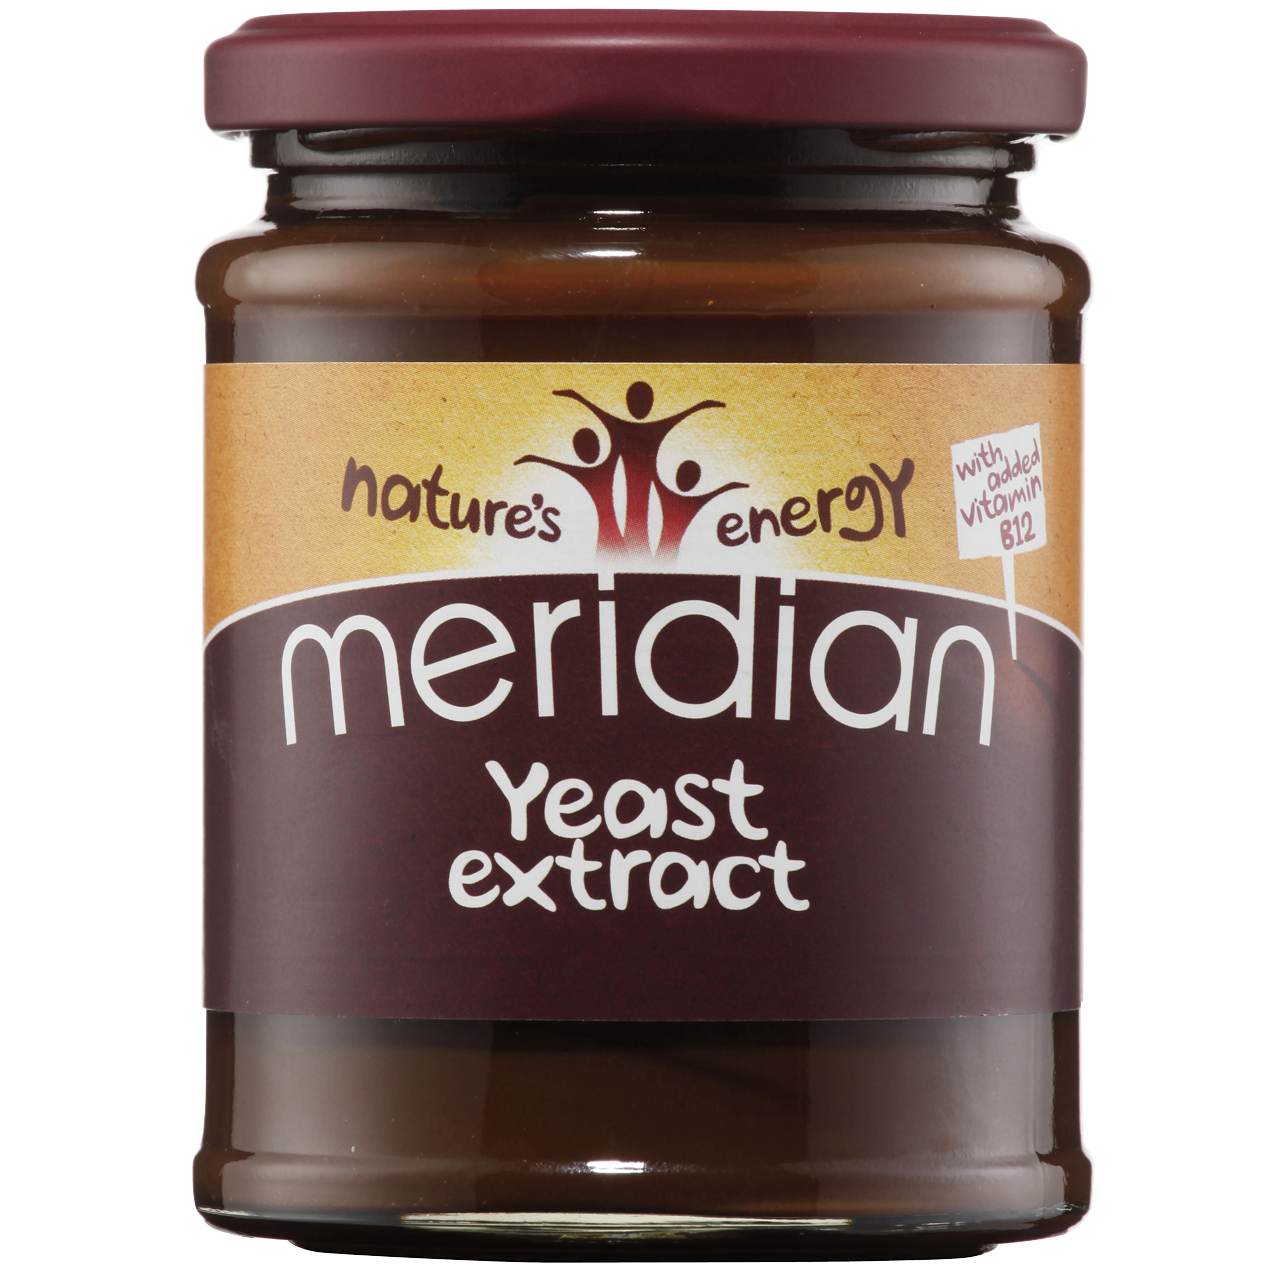 Meridian Yeast Extract - Just Natural